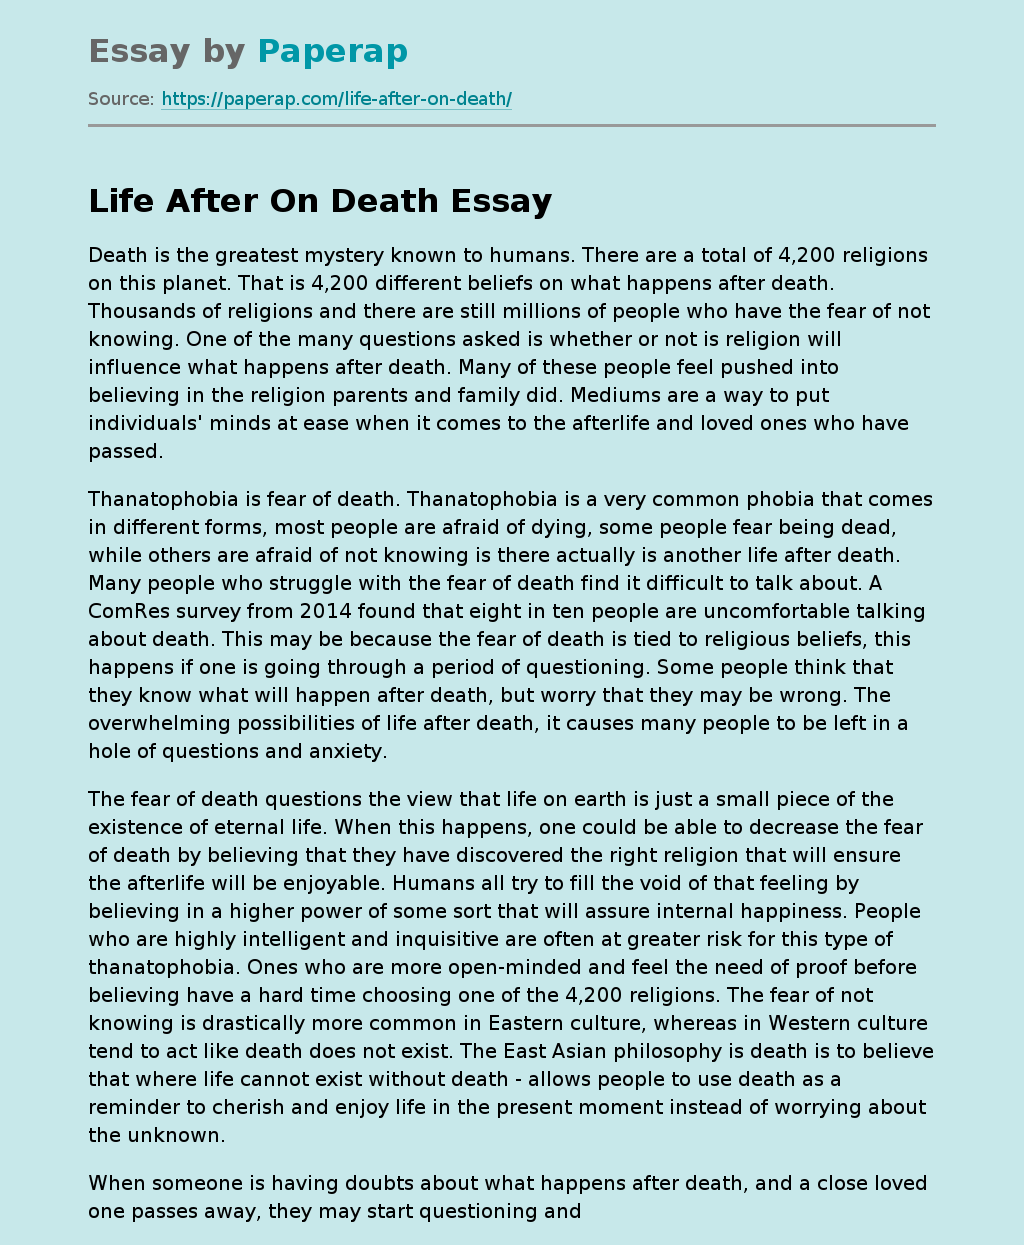 Life After On Death